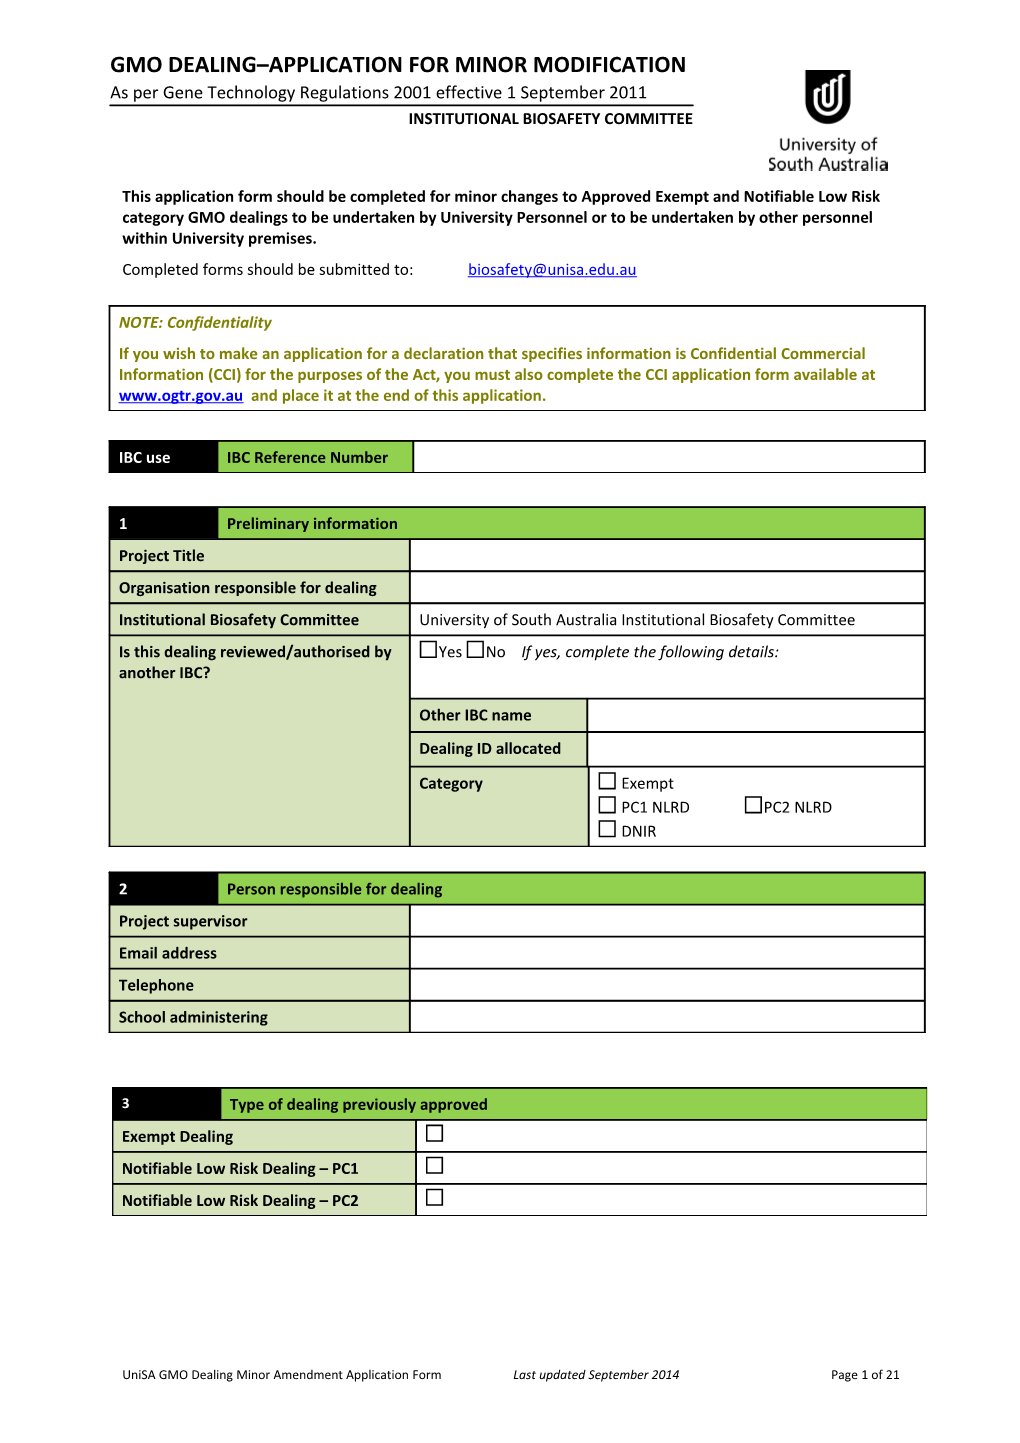 This Application Form Should Be Completed for Minor Changestoapproved Exempt and Notifiable